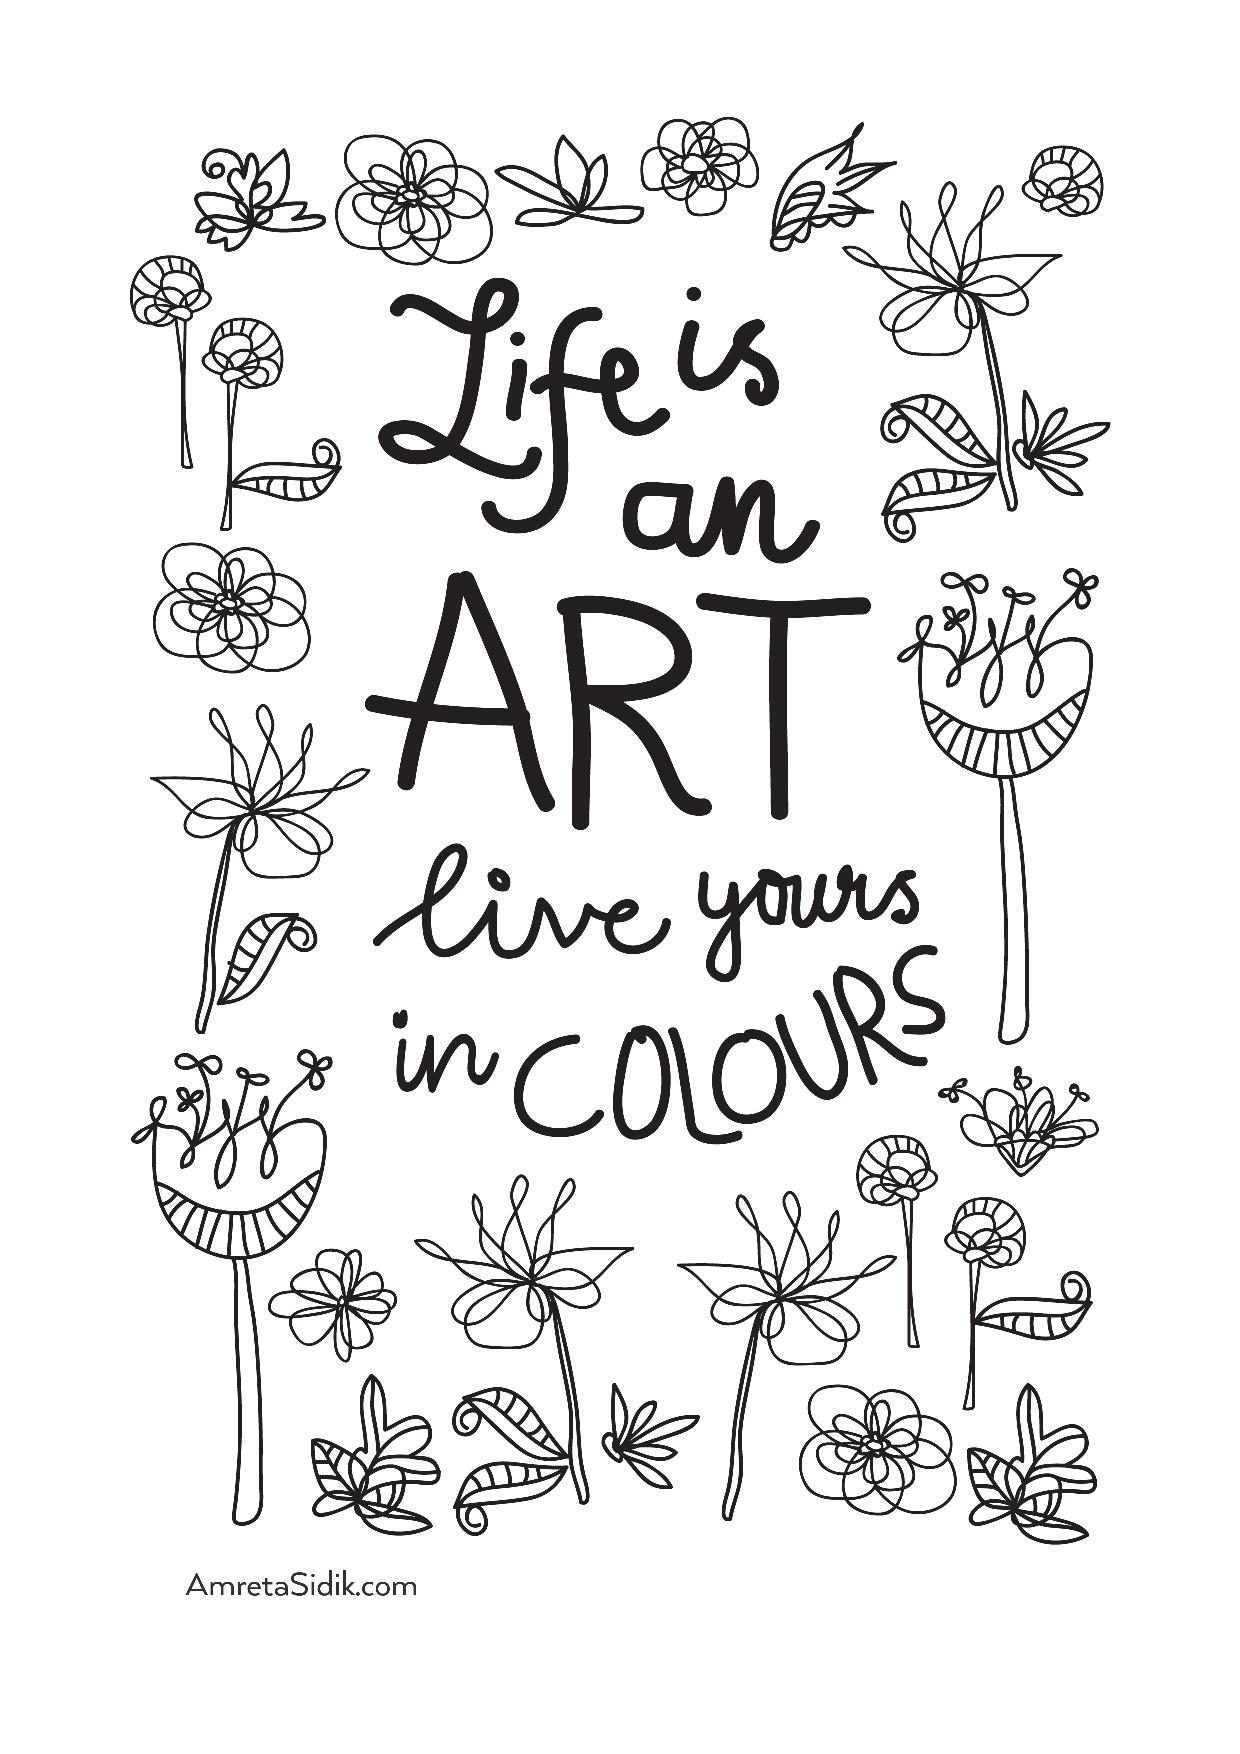 Sentence 'Life is an art, live yours in color' and cute flowers to color, Artist : Amreta Sidik